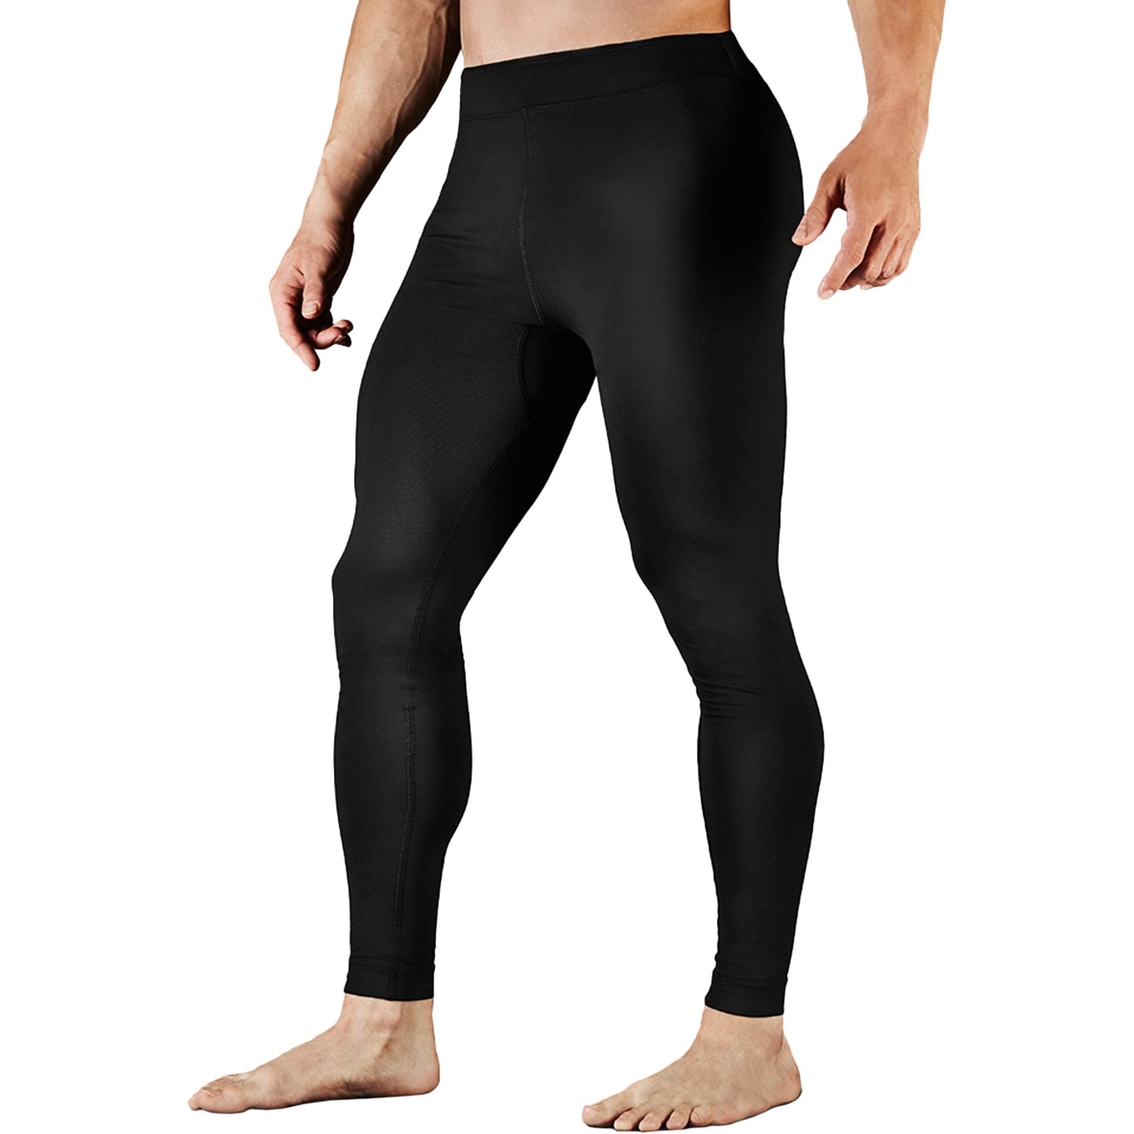 Tommie Copper Running Tights, Pants